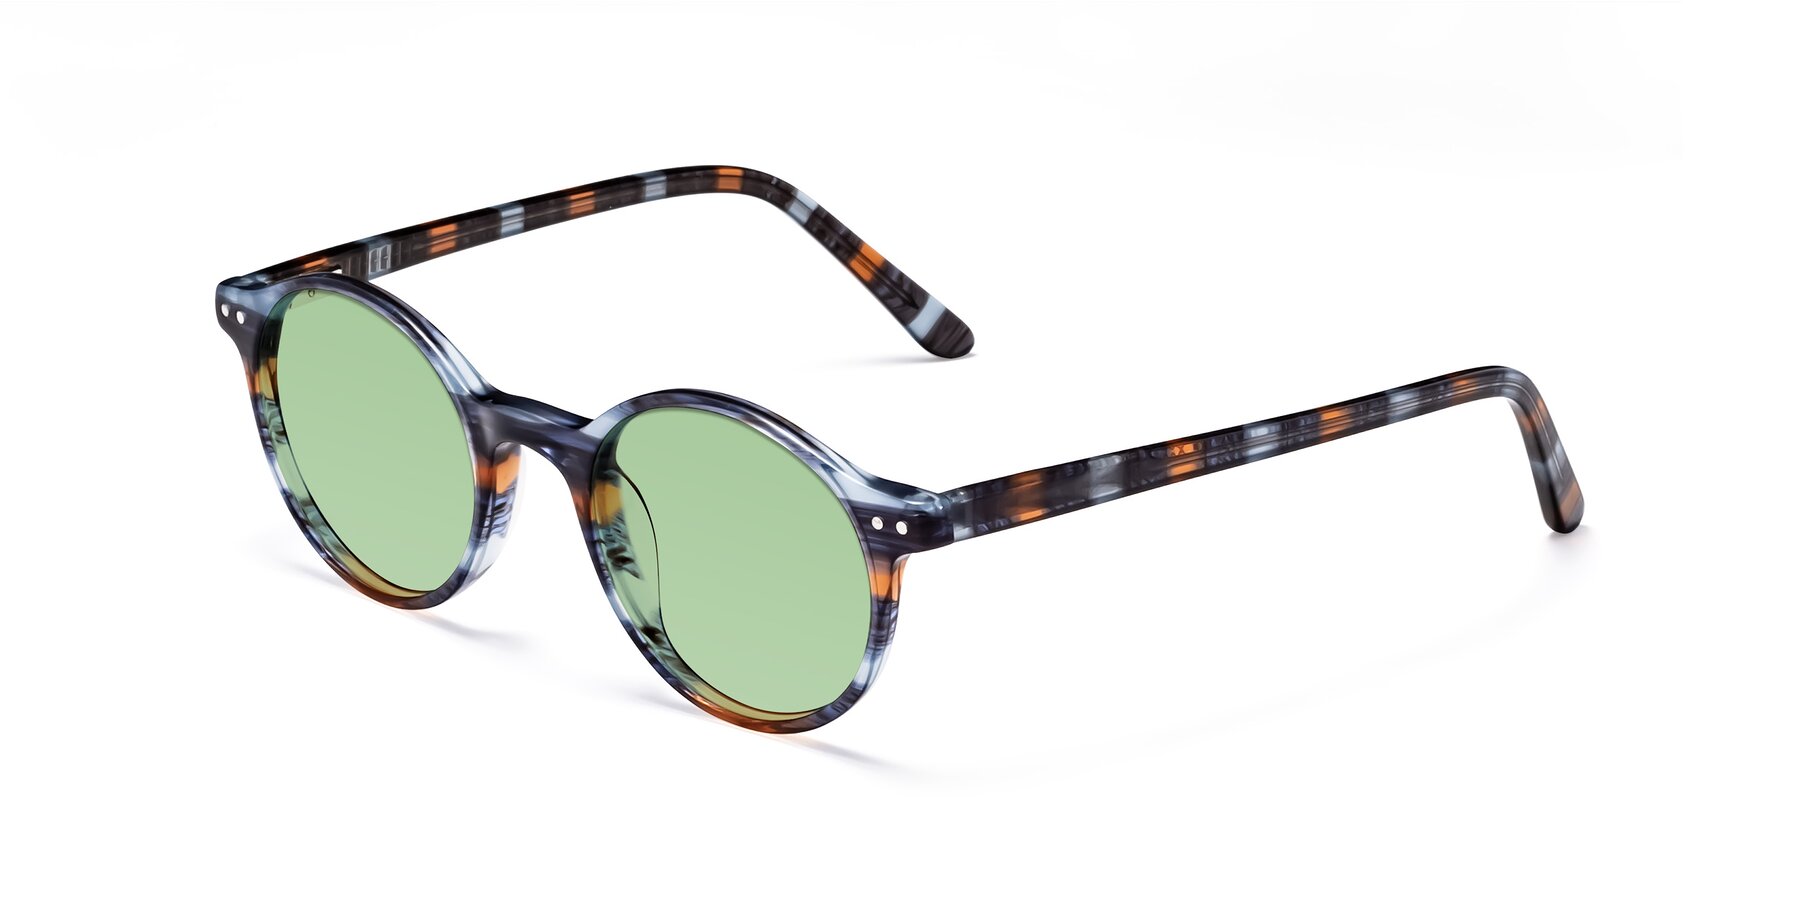 Angle of Jardi in Stripe Blue Brown with Medium Green Tinted Lenses